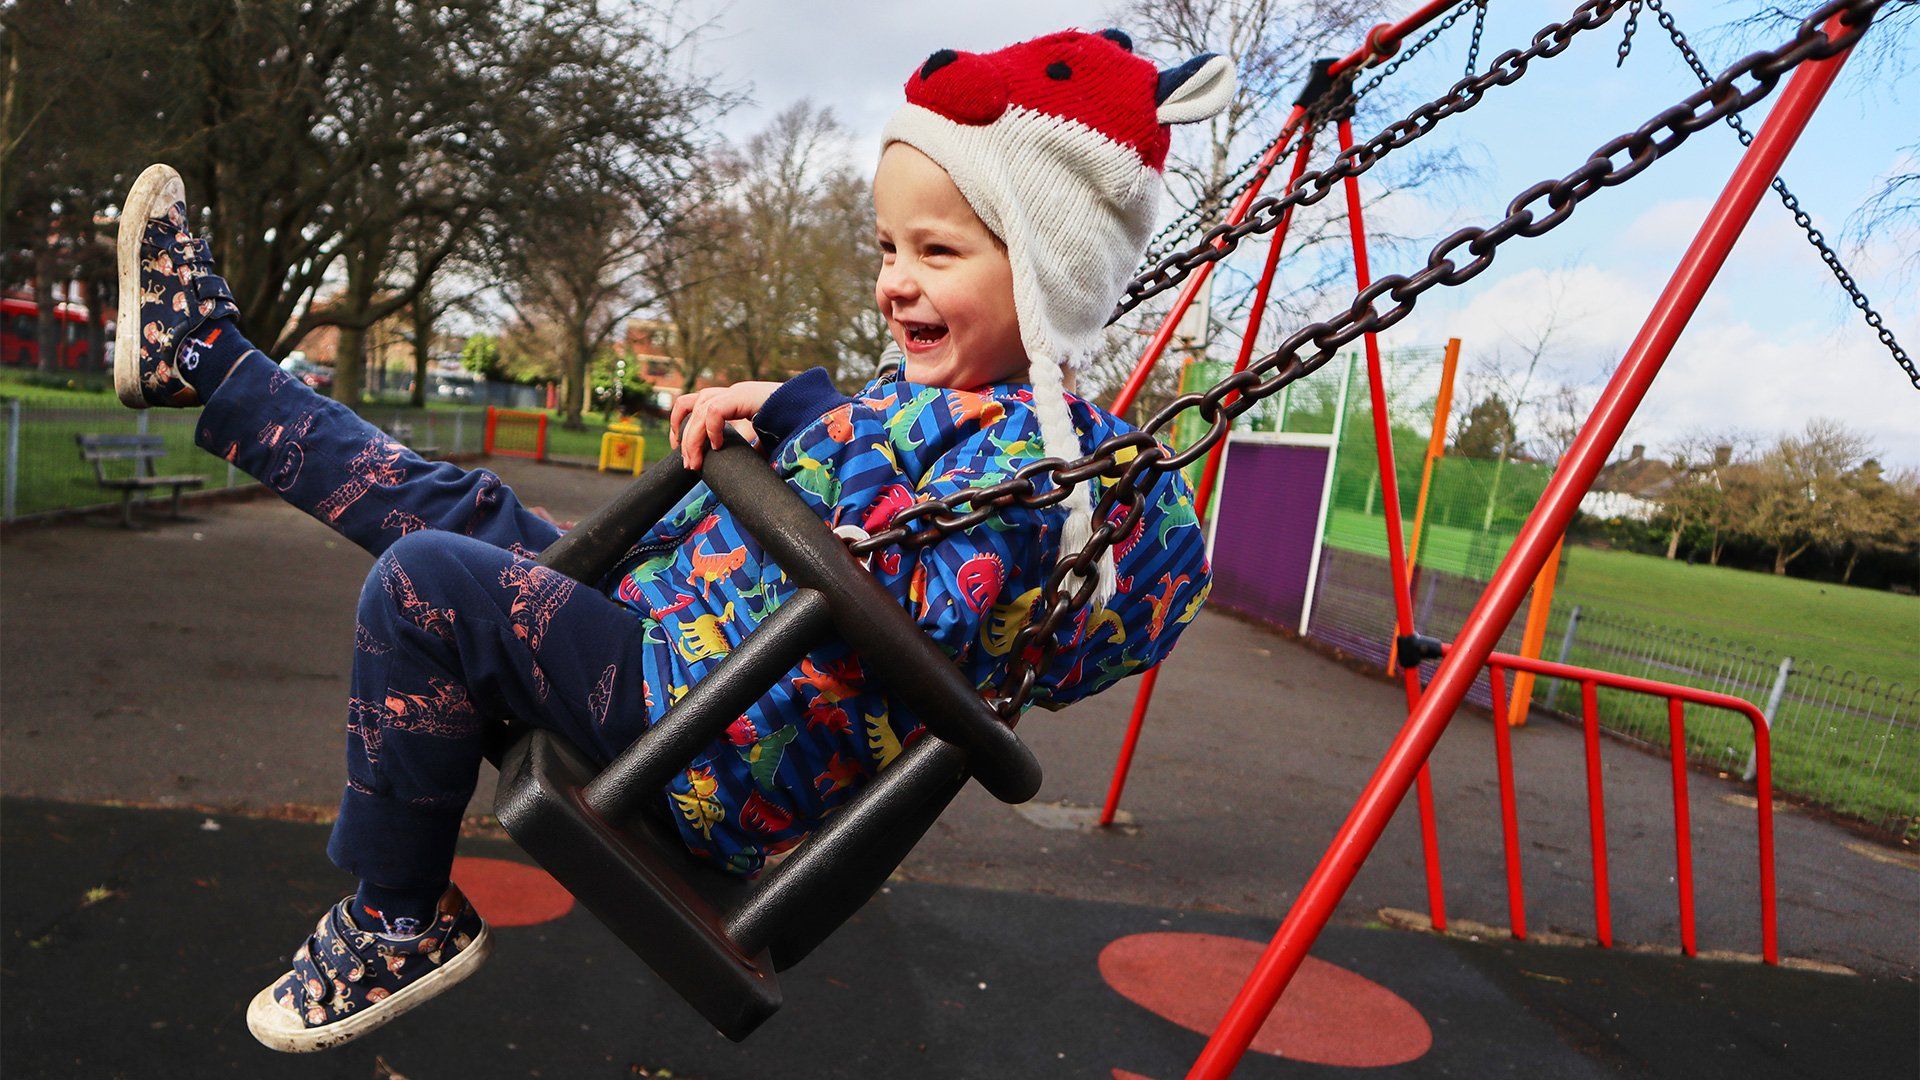 A young boy swings on a swing, laughing. Taken on a Canon EOS M50 by Katja Gaskell.